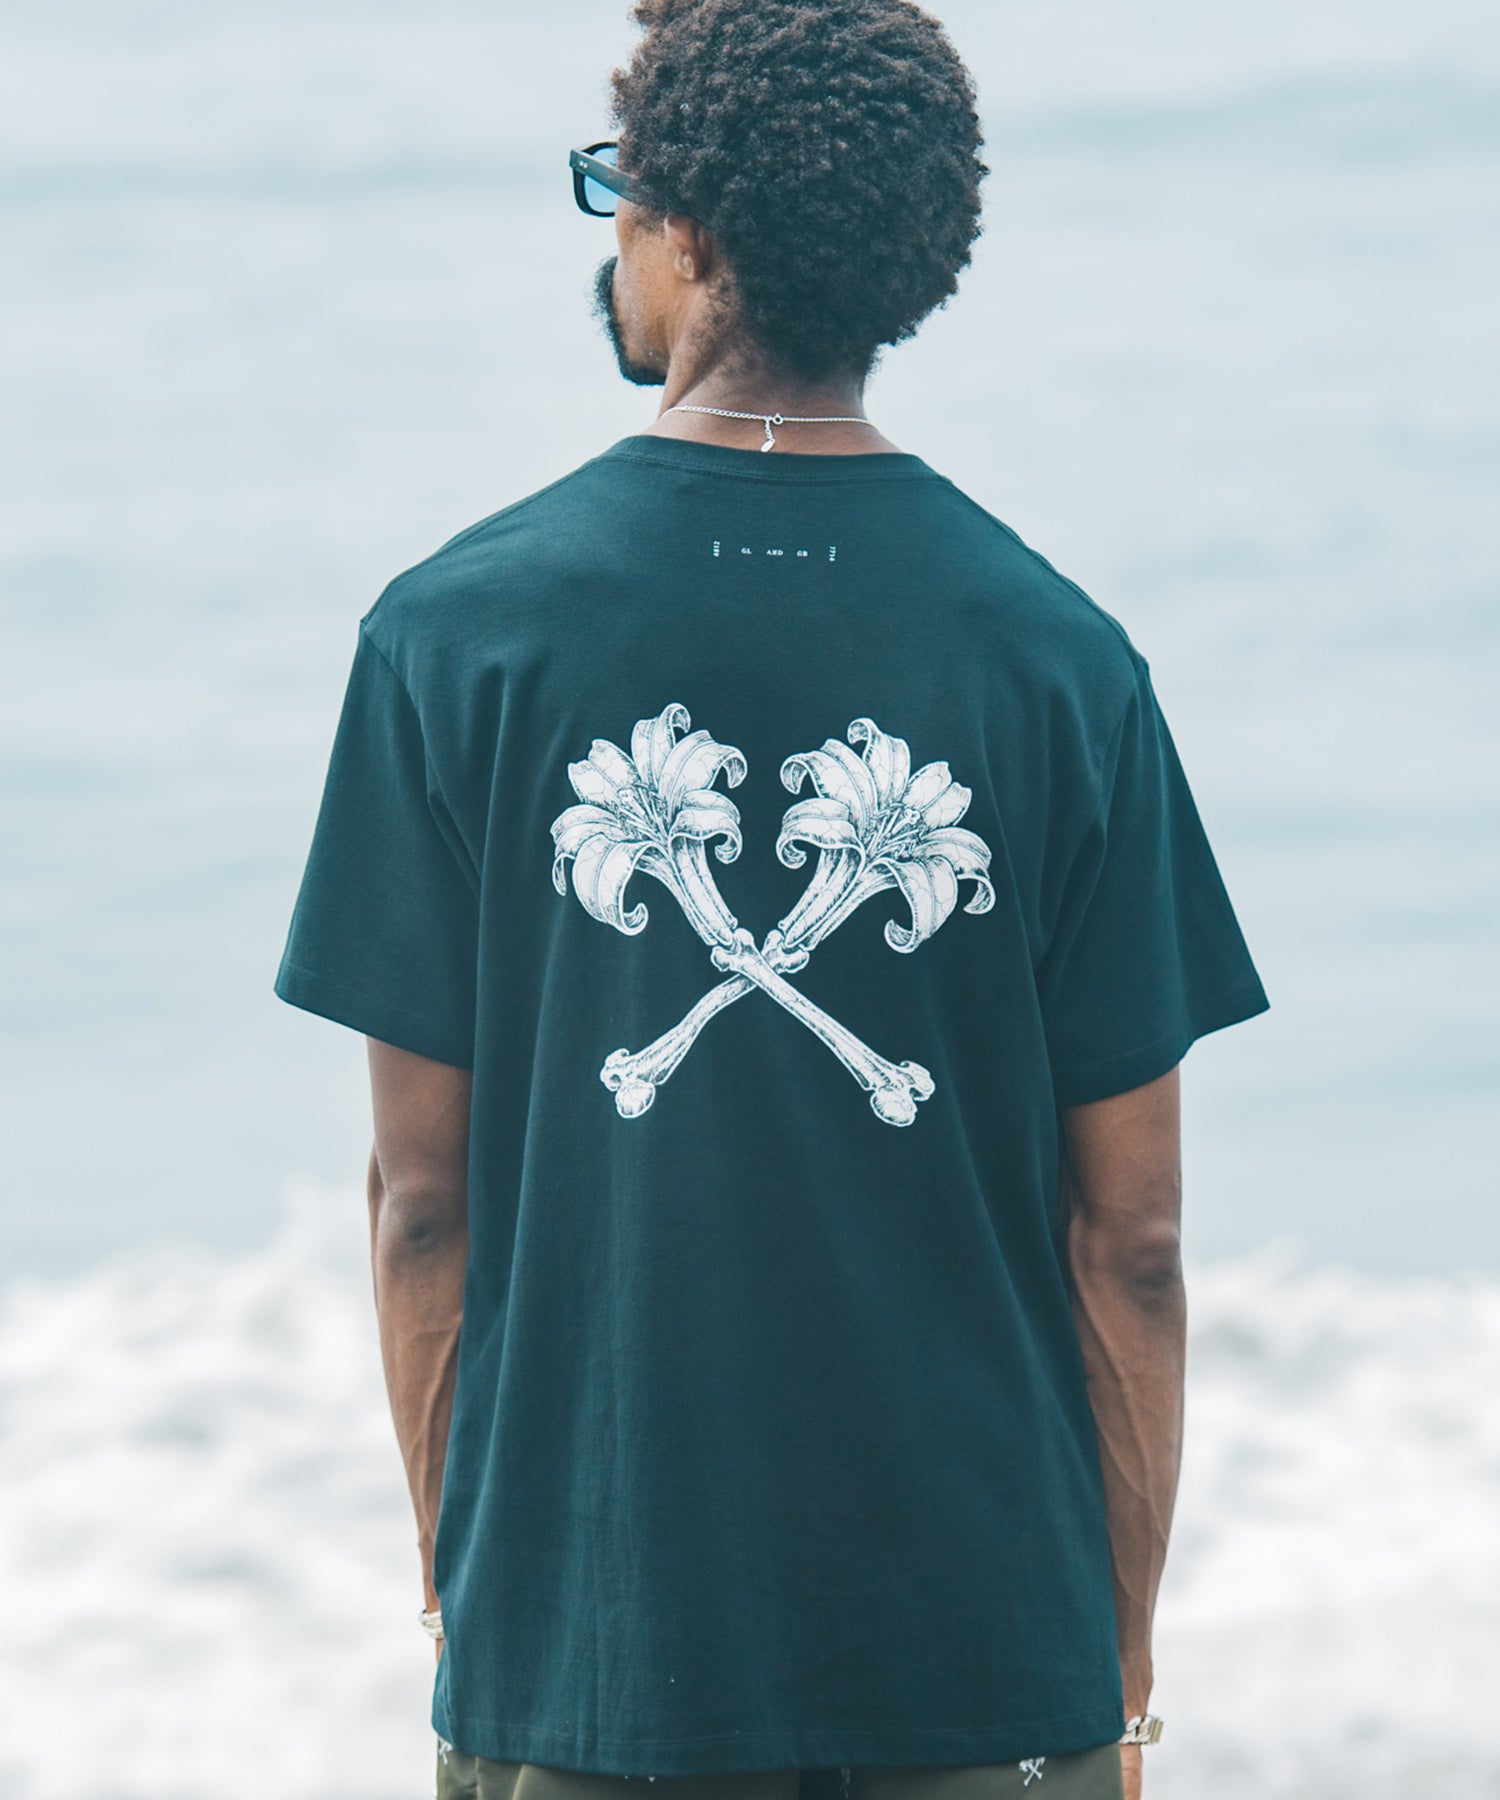 "CROSS THE LILY" POCKET T SHIRT(MAGICAL DESIGN)